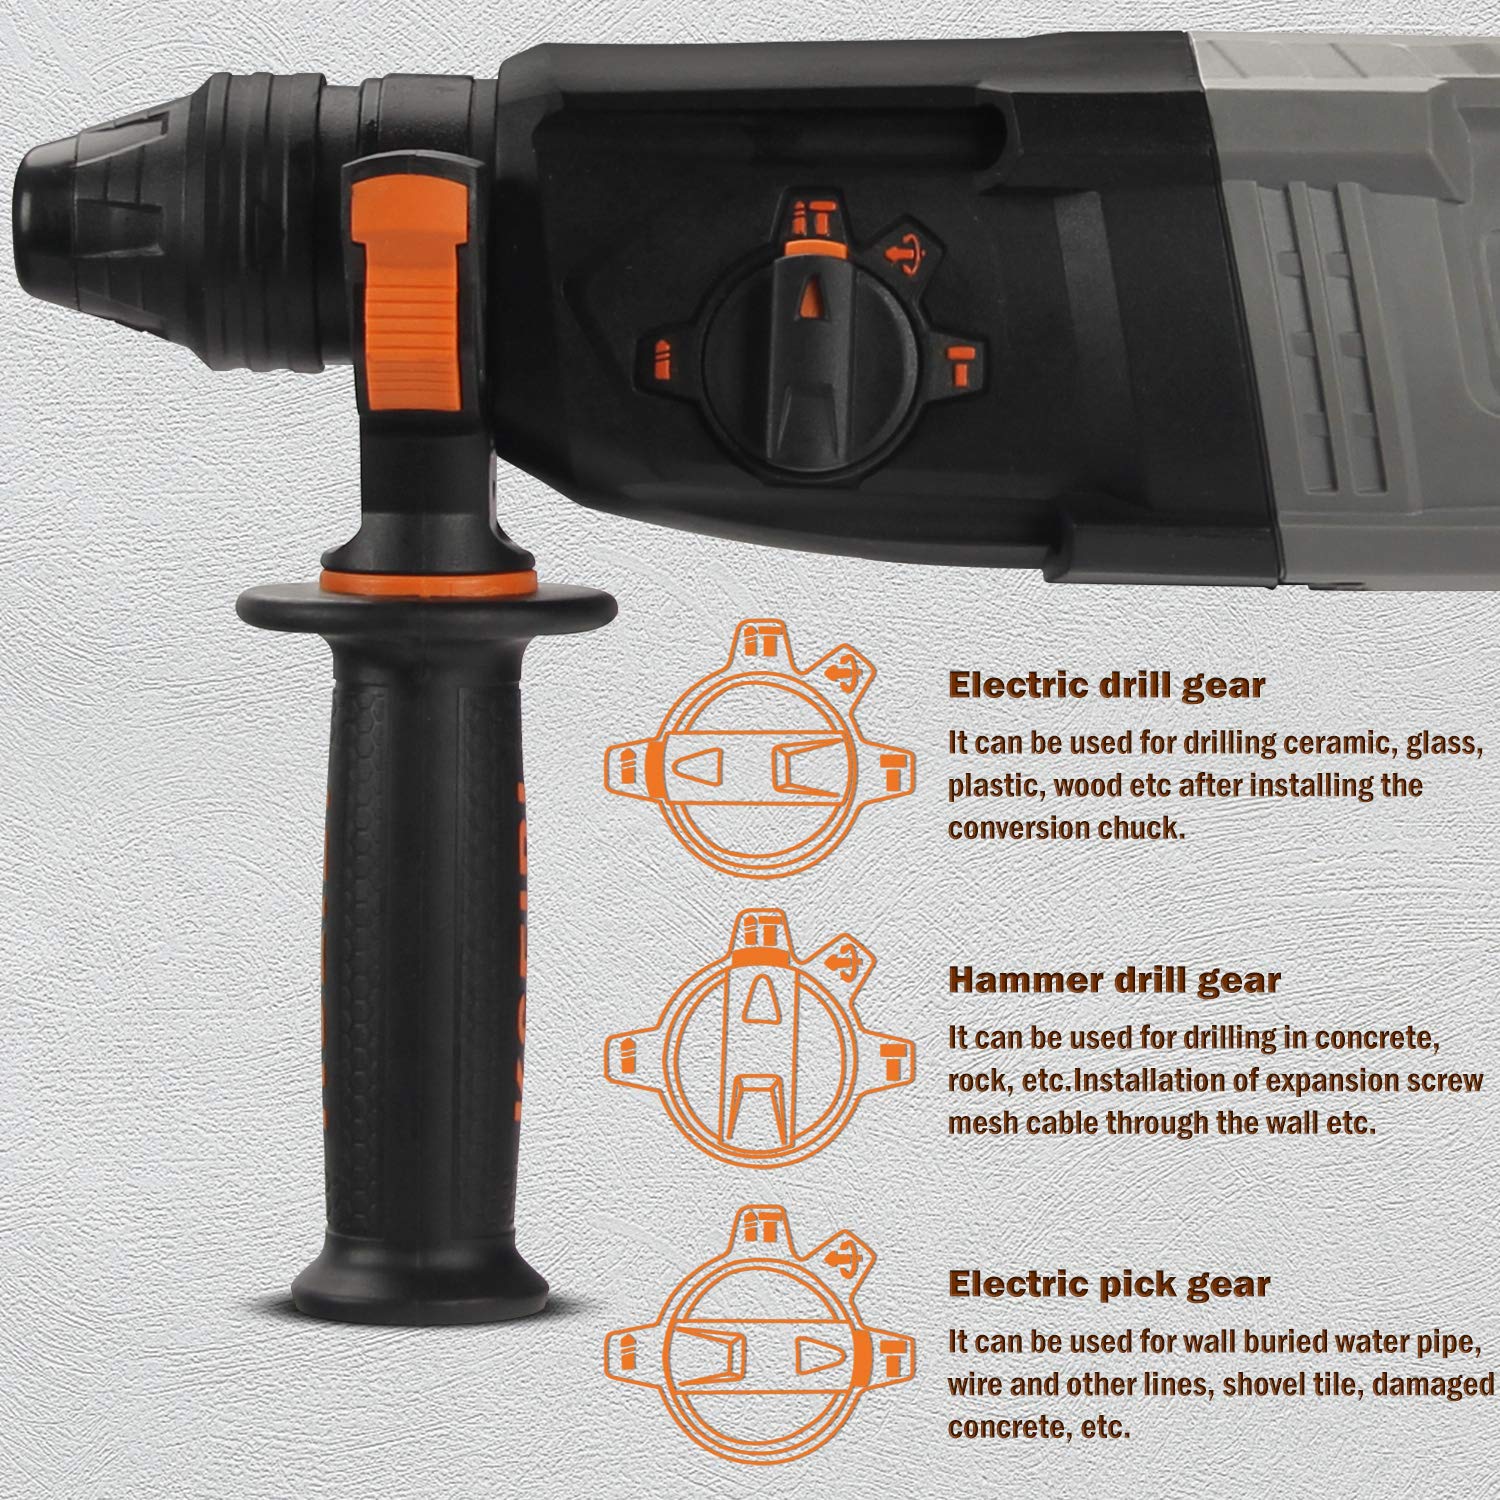 KSEIBI 1 inch Rotary Hammer Drill 6.5 Amp SDS Plus 4 Functions Reduced Vibration Variable Speed Drilling 900RPM, 4350BPM, 5 Joules Impact Rate, Safety Clutch (KSH 3-26)